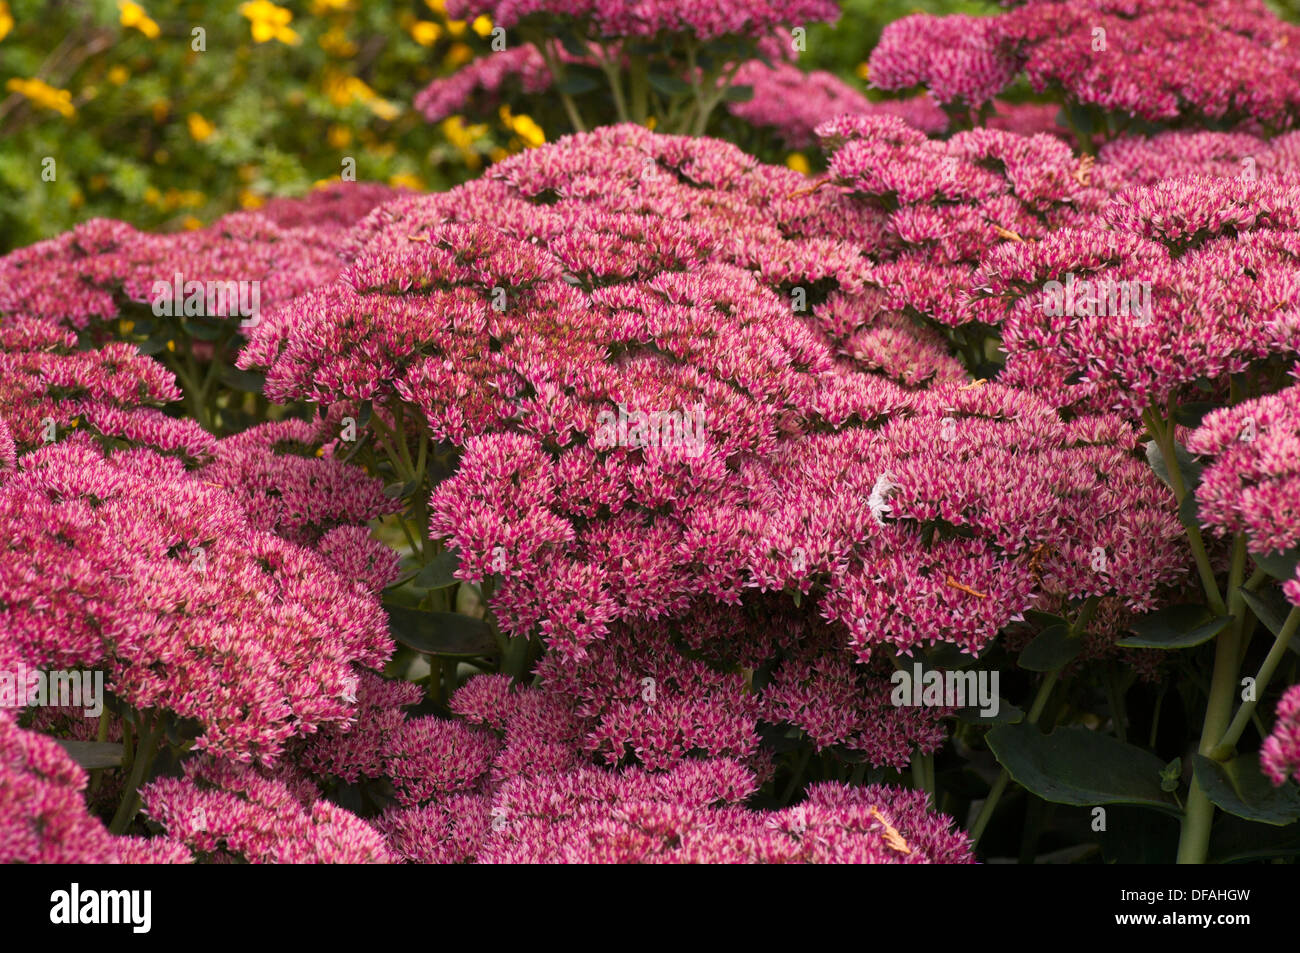 Red and White Sedum Flowers stonecrop Herbstfreude Stock Photo